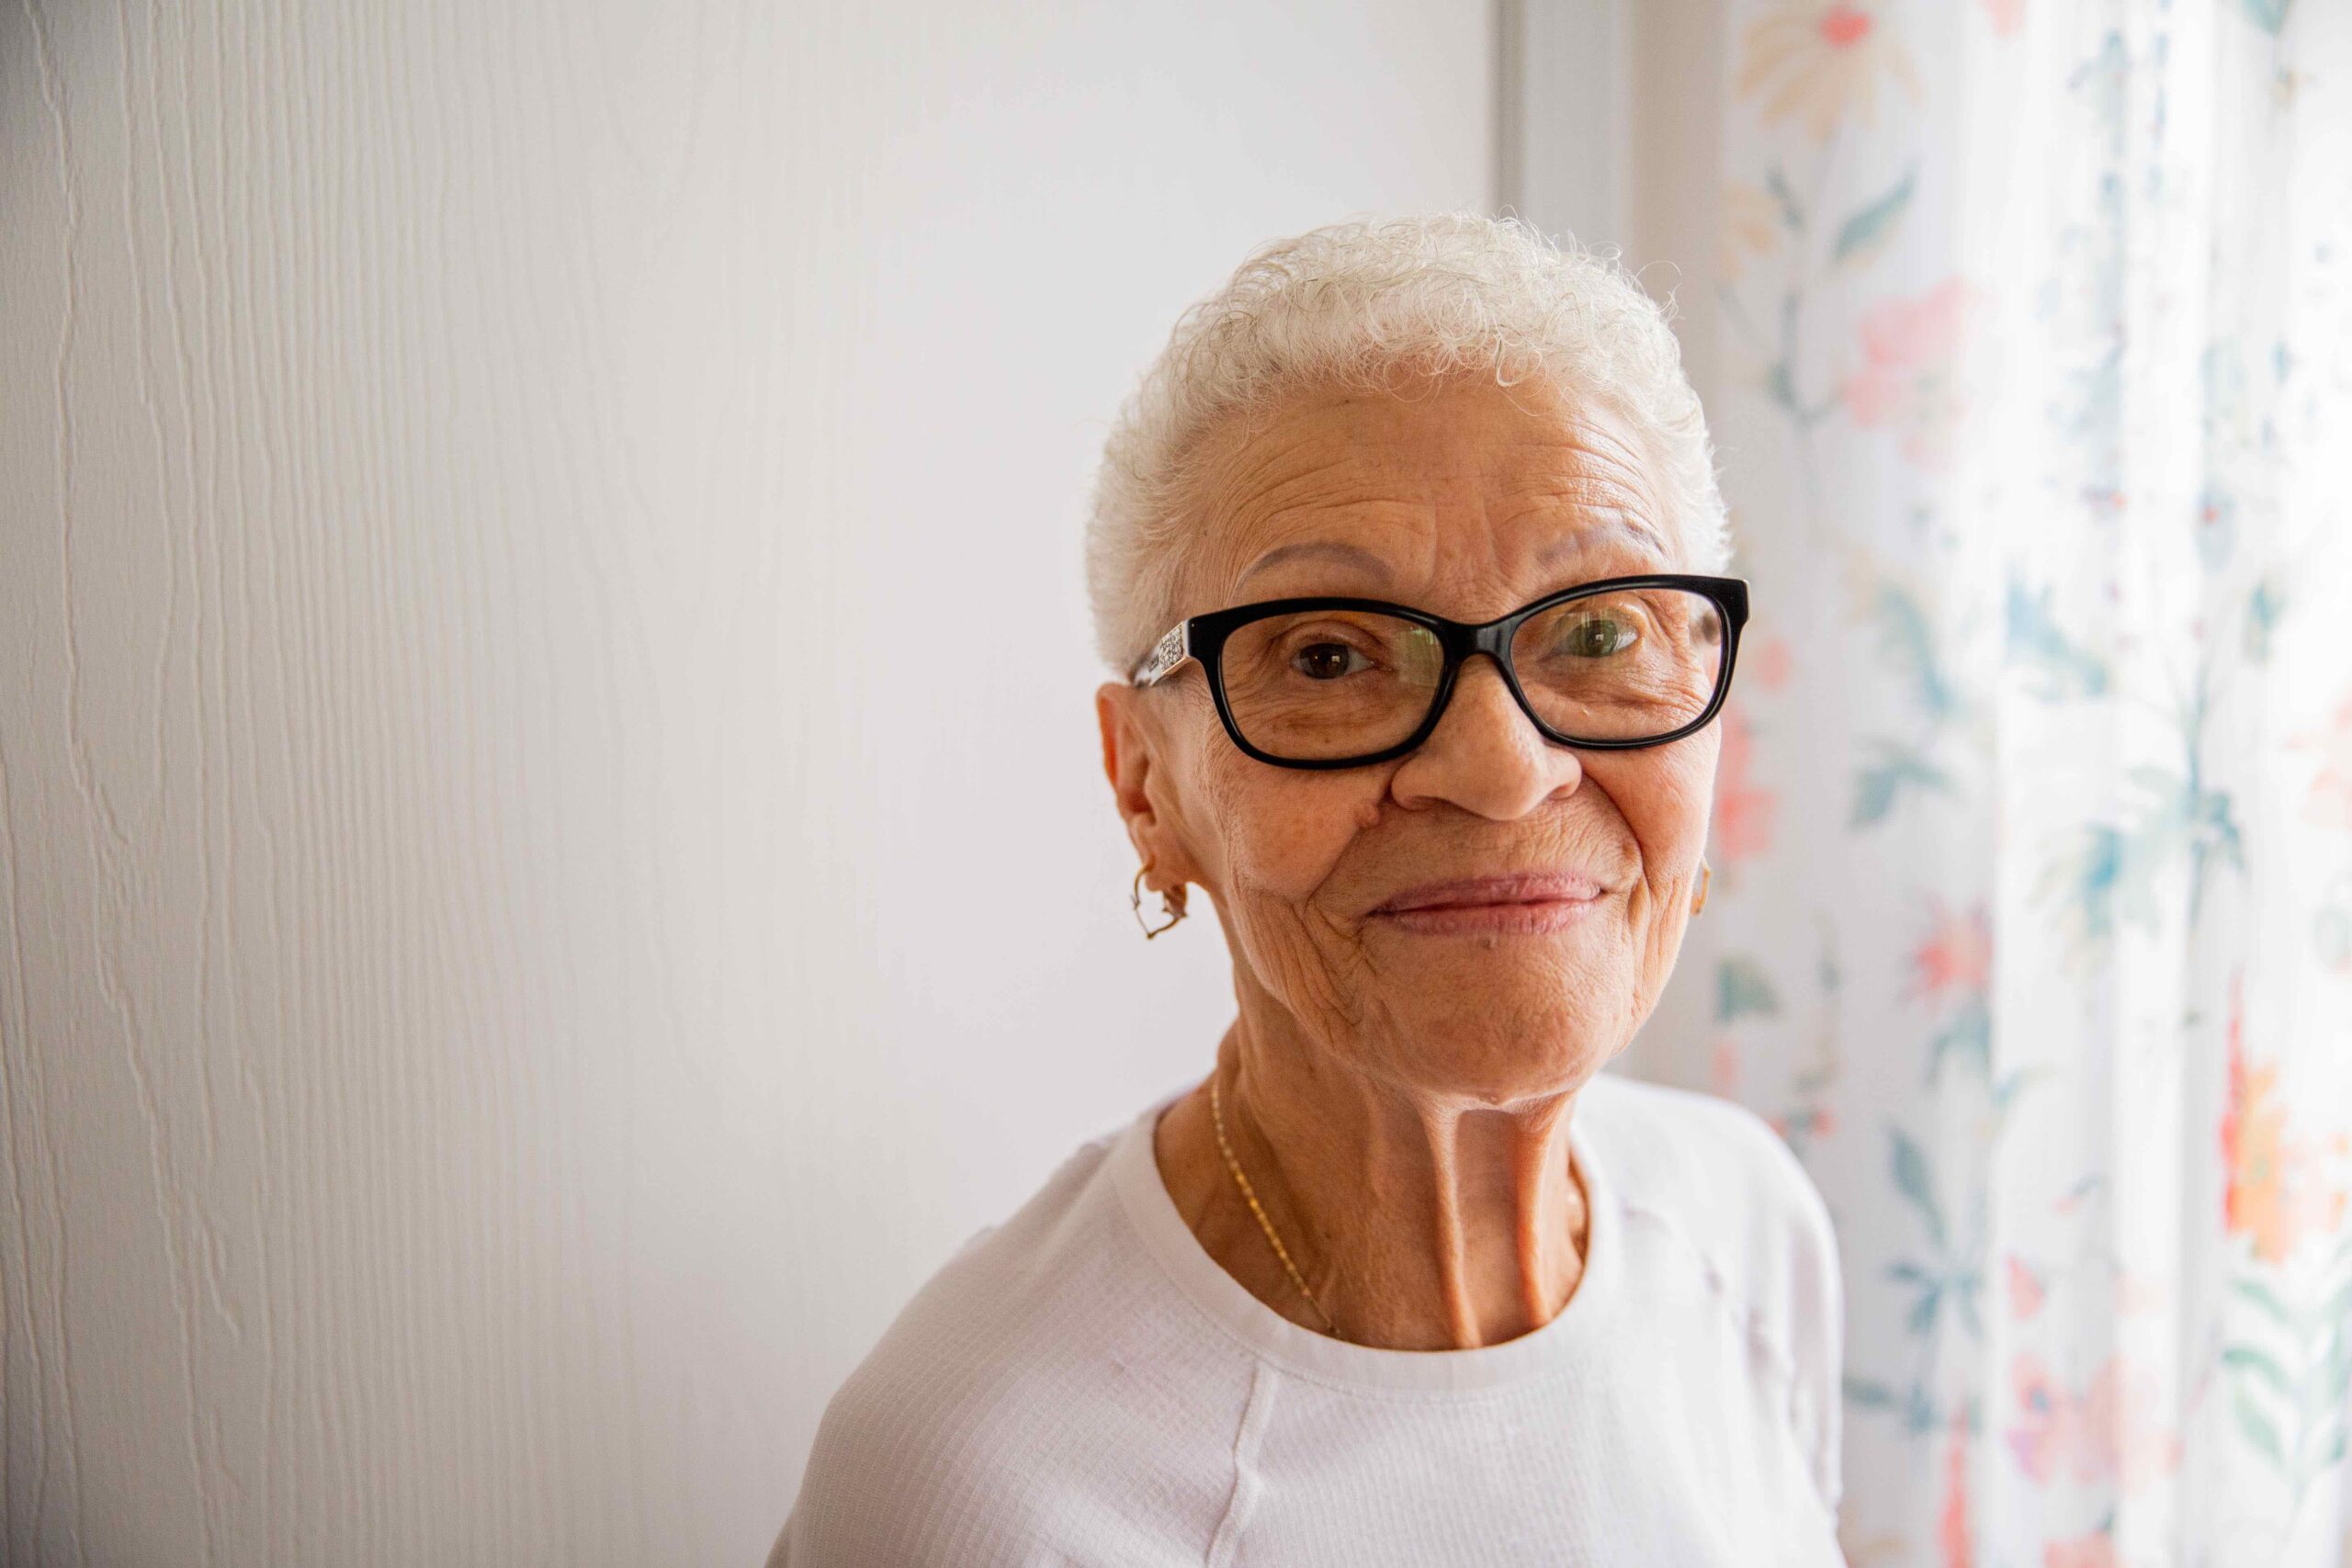 While battling cancer and facing medical debt, Hilda found sanctuary with Volunteers of America Michigan Because of you, Hilda is able to remain independent and have a place to call her own.